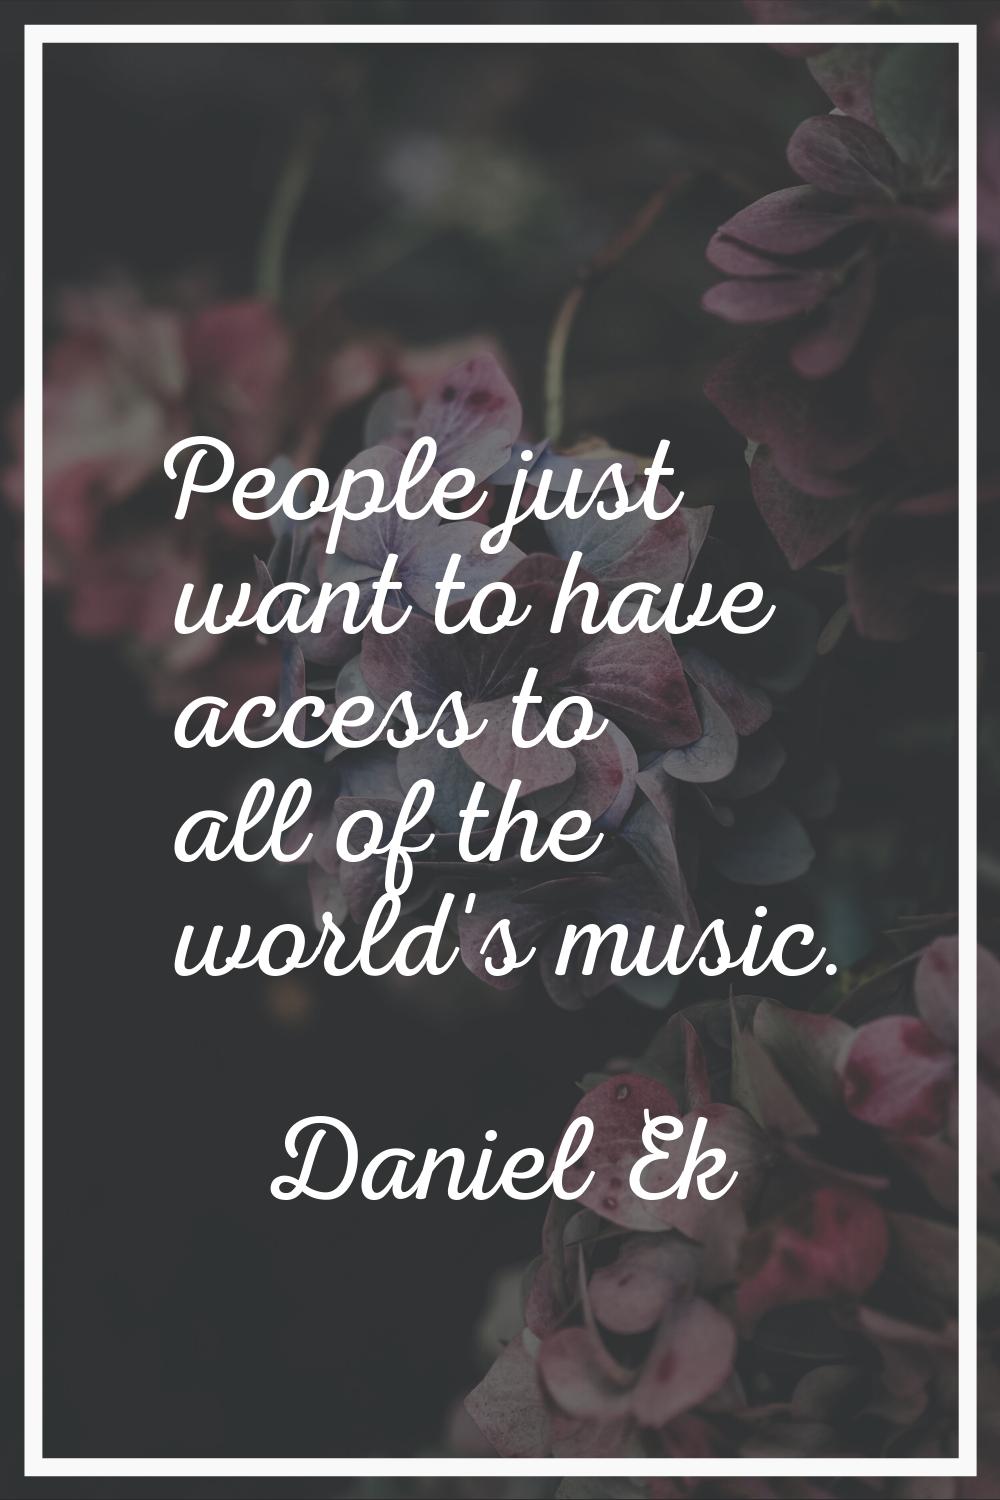 People just want to have access to all of the world's music.